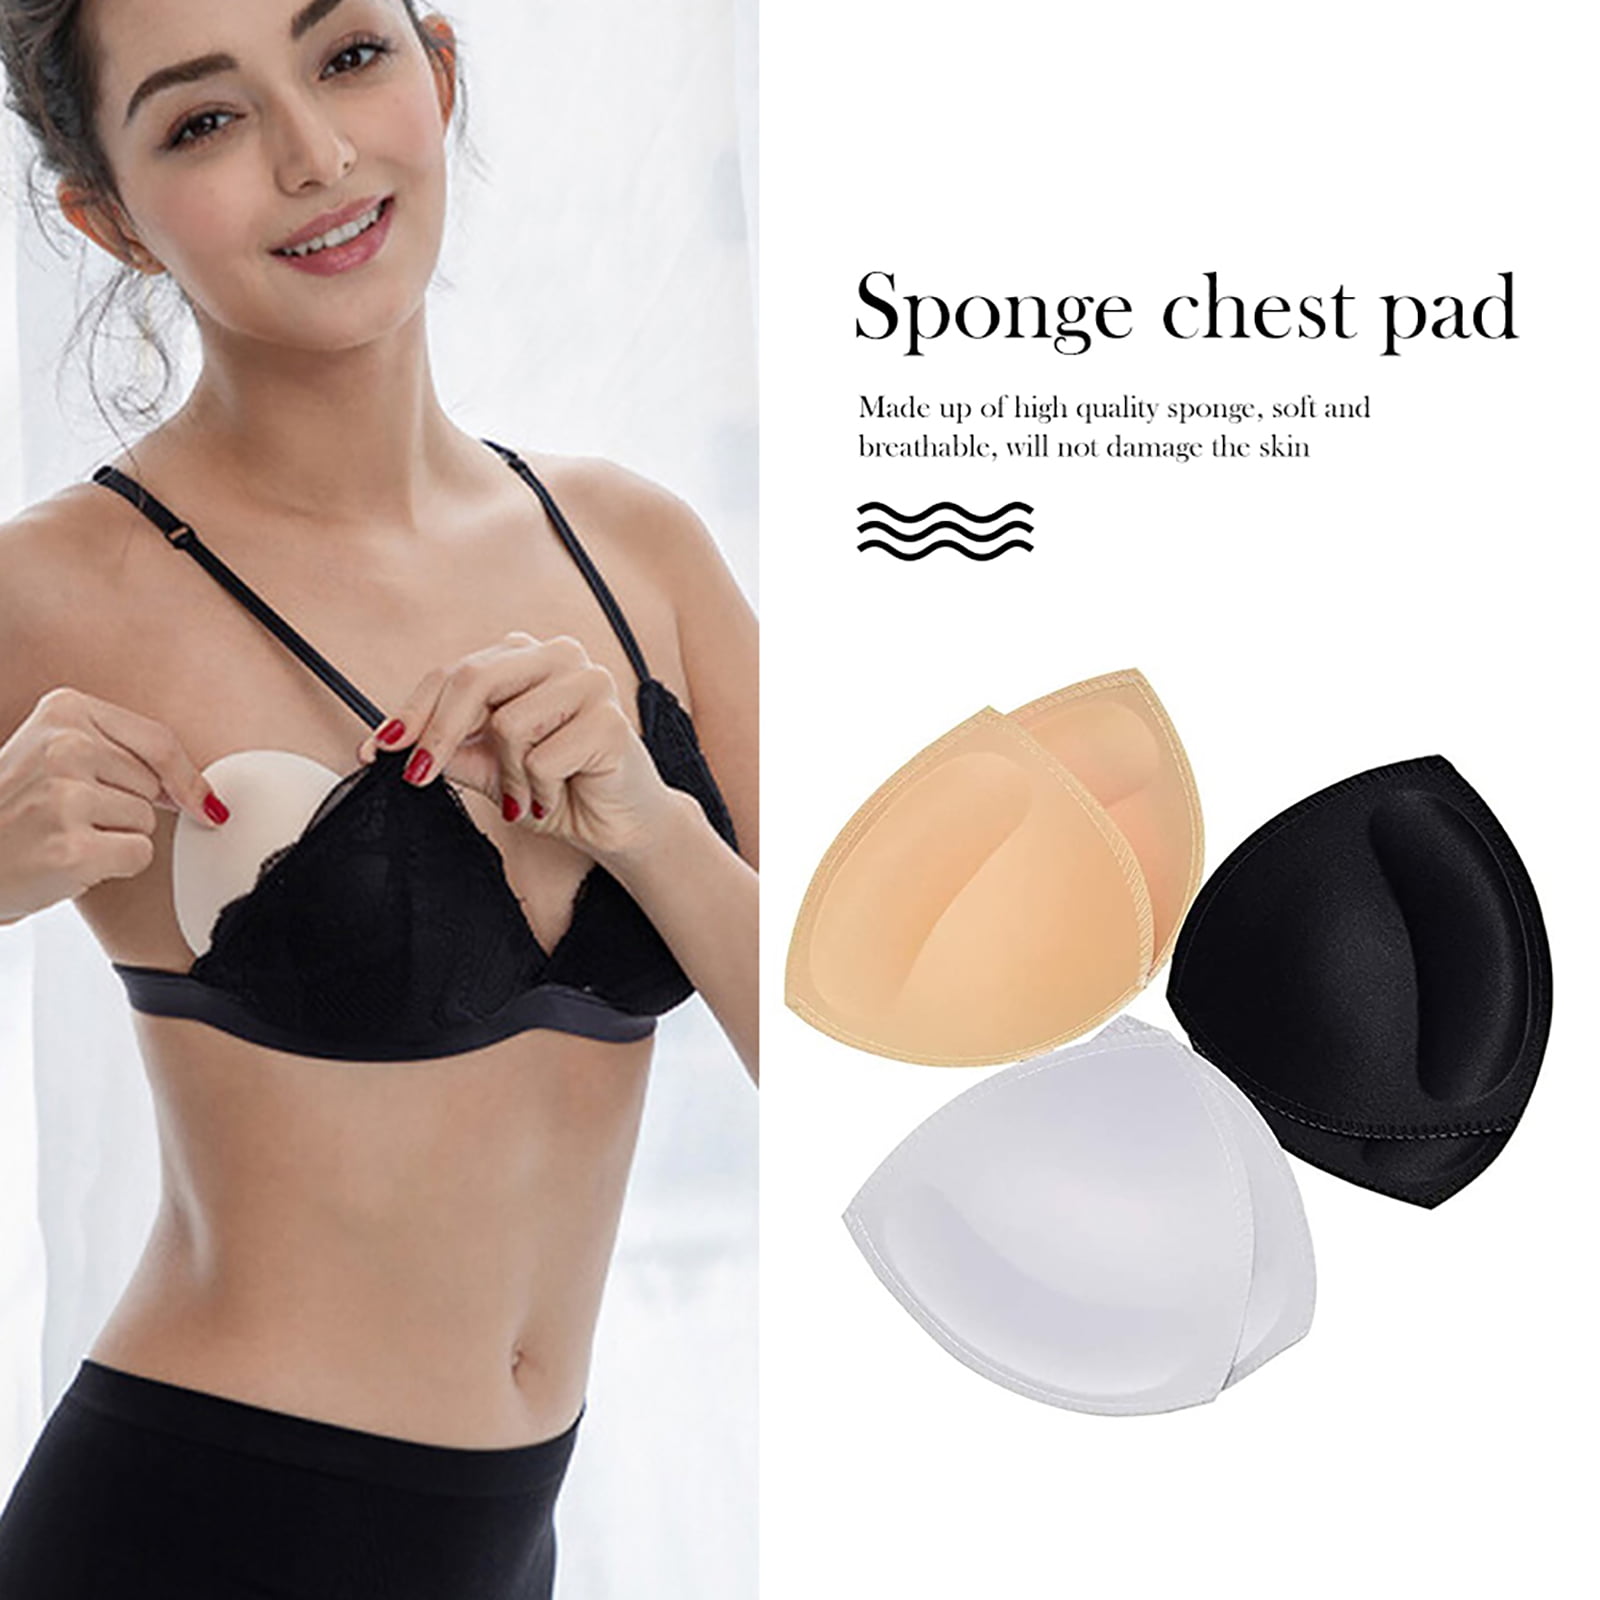 BH Pads - Heart shaped Push Up Pads to put in the Bra - Beige